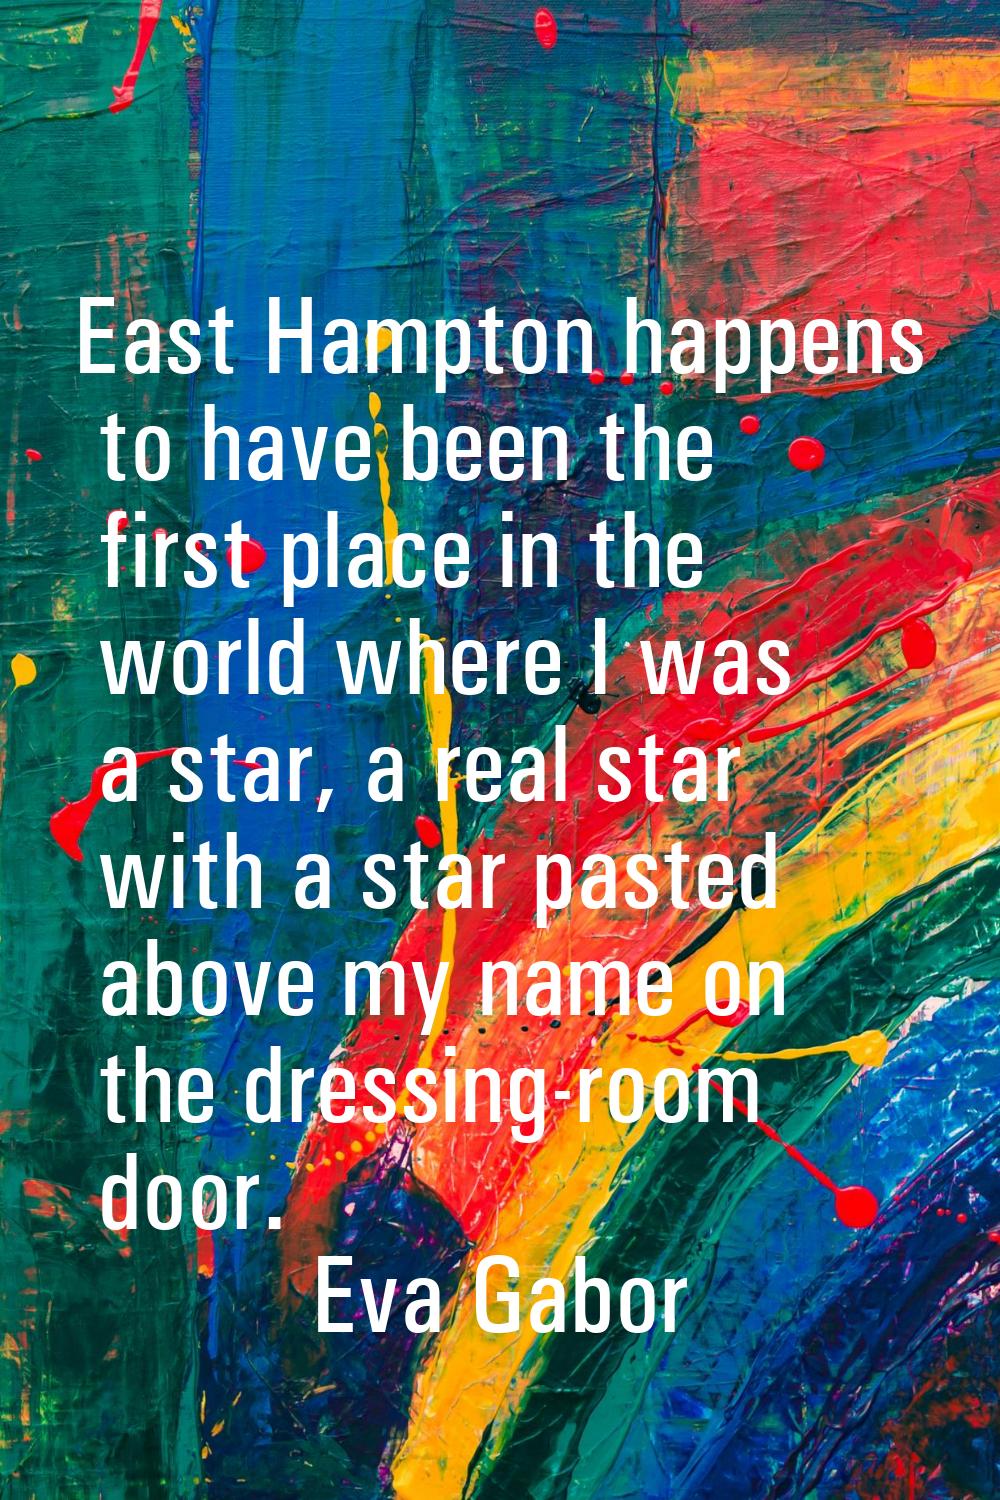 East Hampton happens to have been the first place in the world where I was a star, a real star with